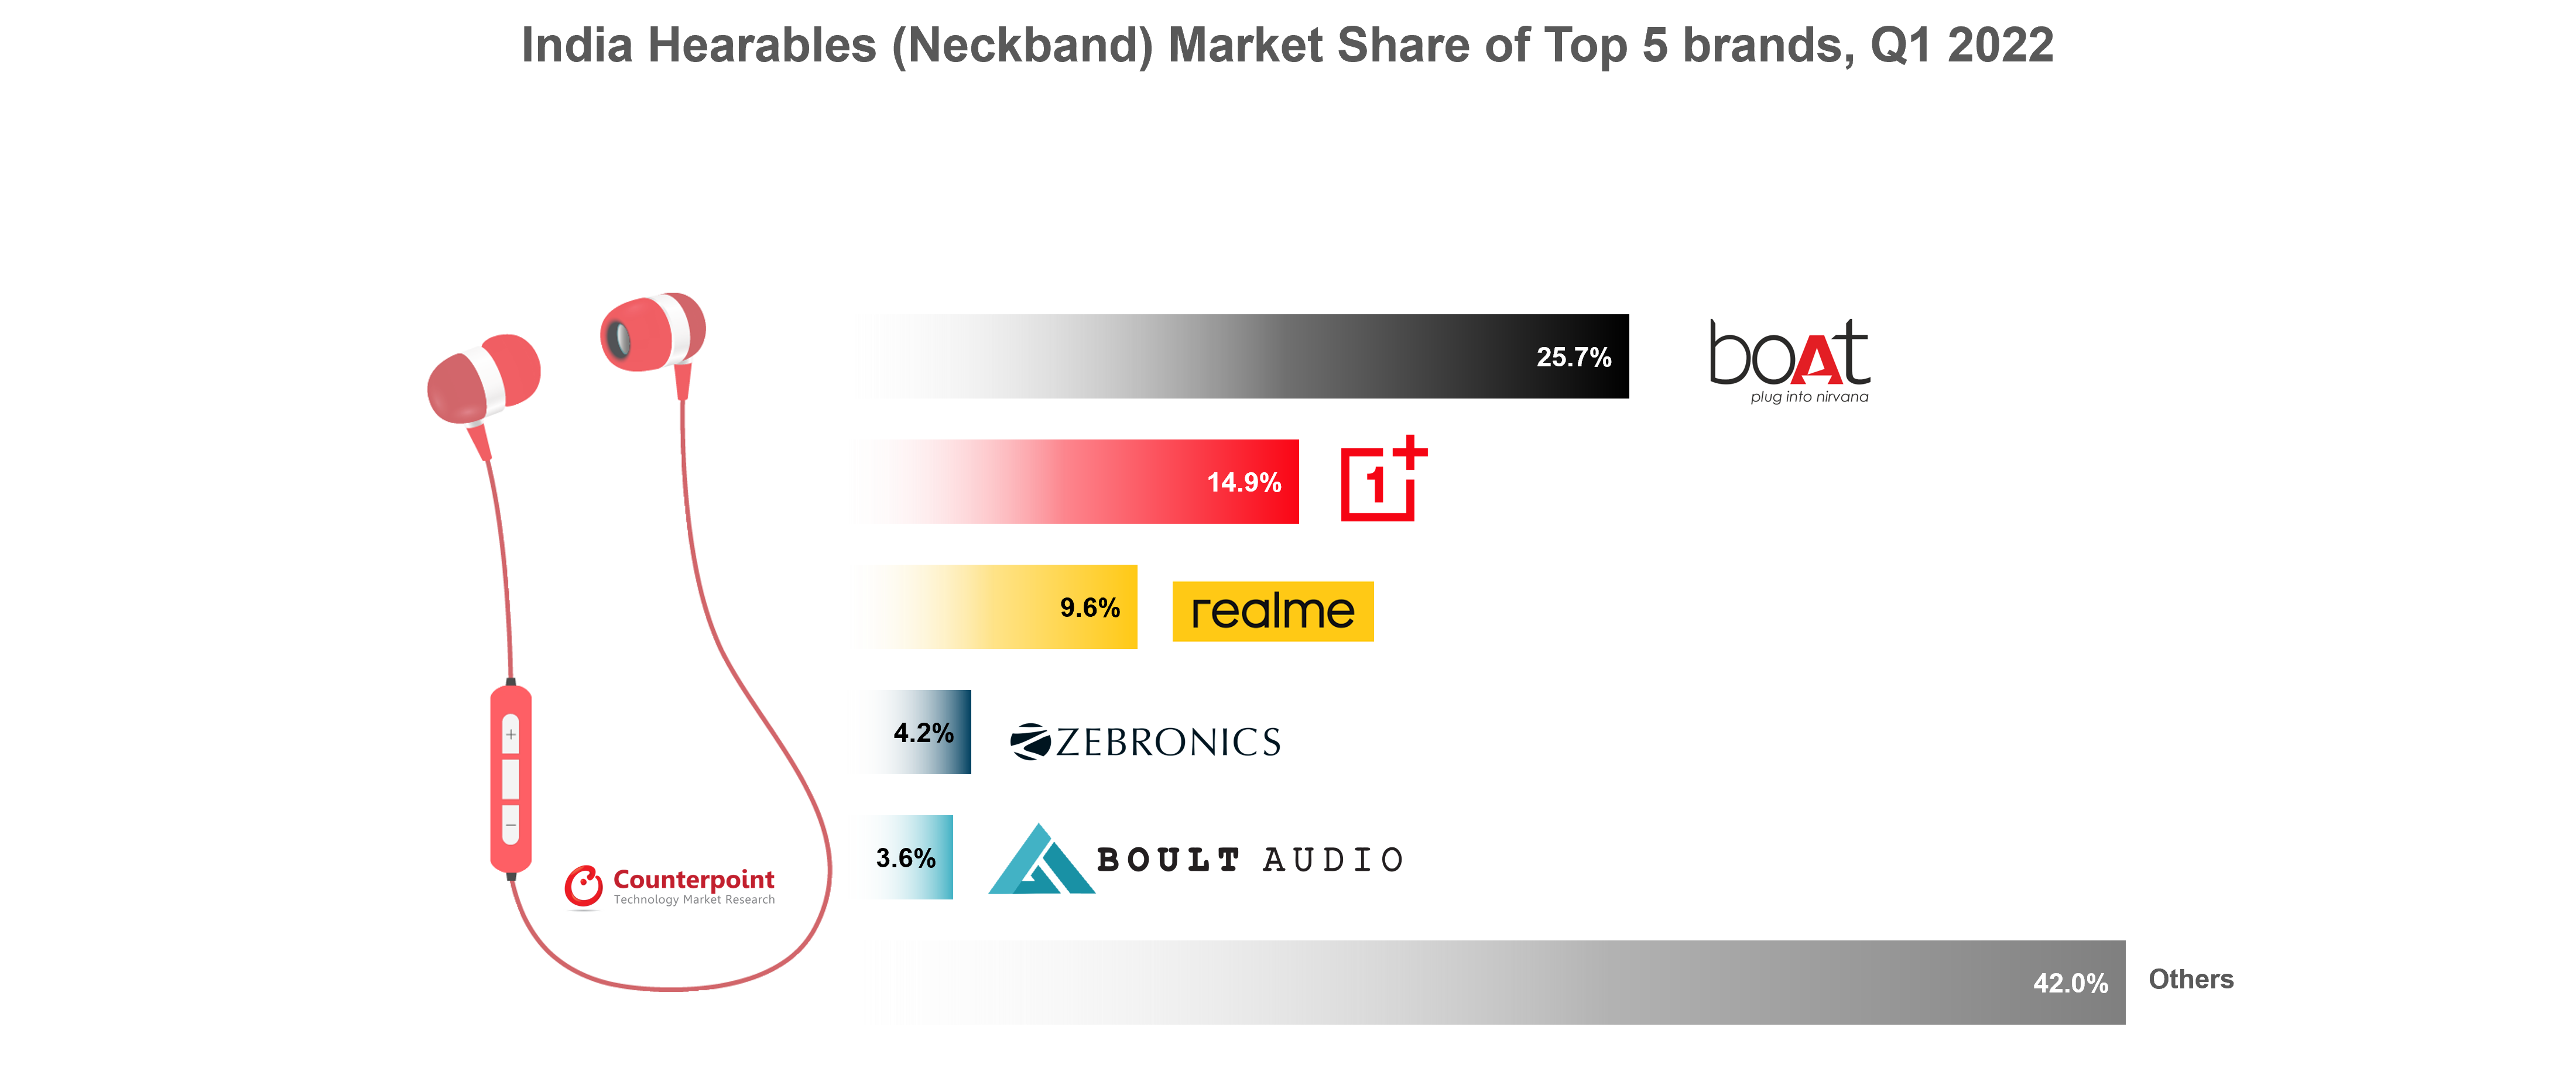 India Hearables (Neckband) Market Share of Top 5 brands, Q1 2022